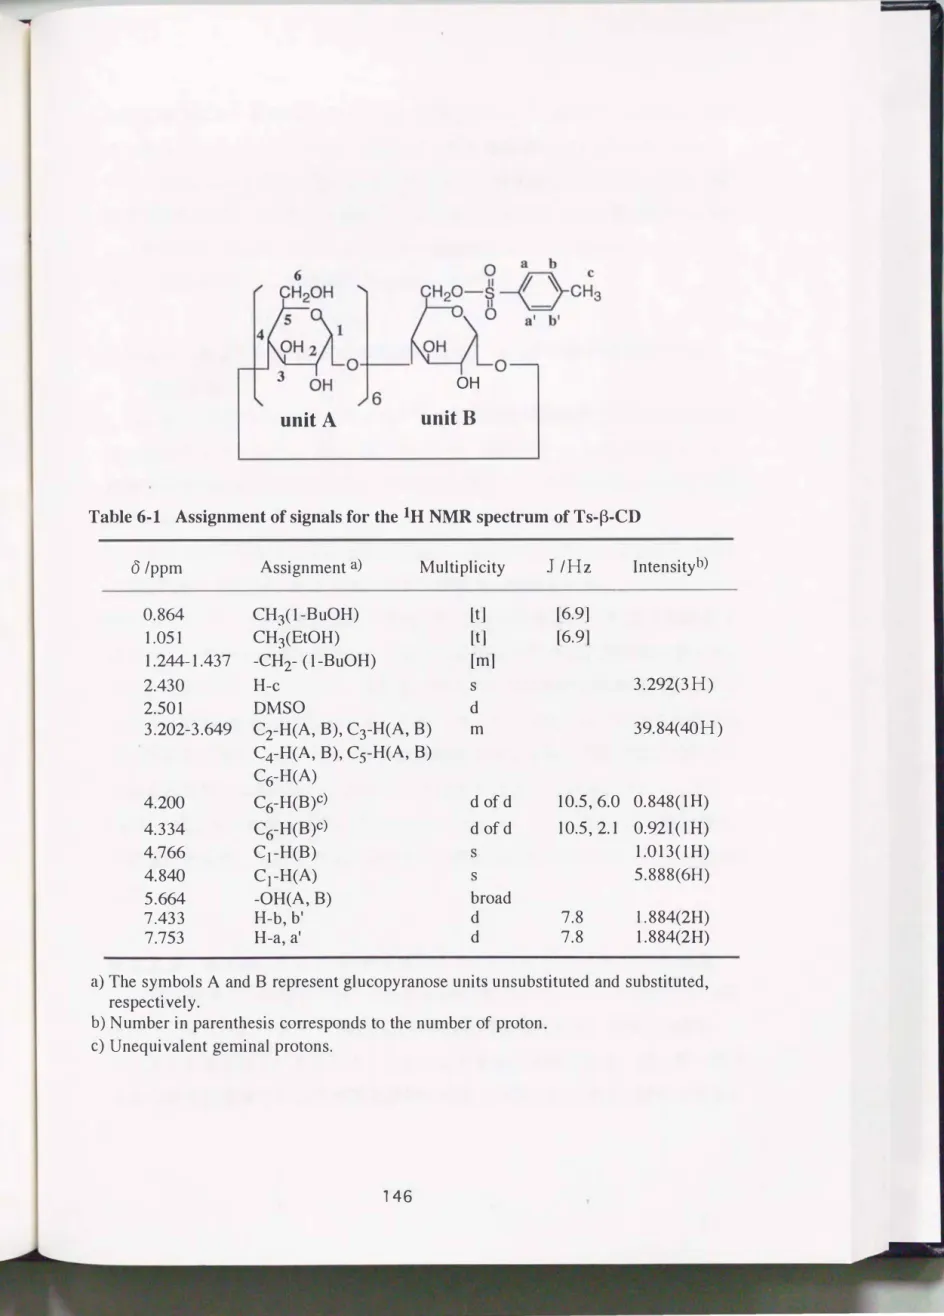 Table  6・1 Assignment of signals for the  lH  NMR  spectrum of Ts-ß-CD 